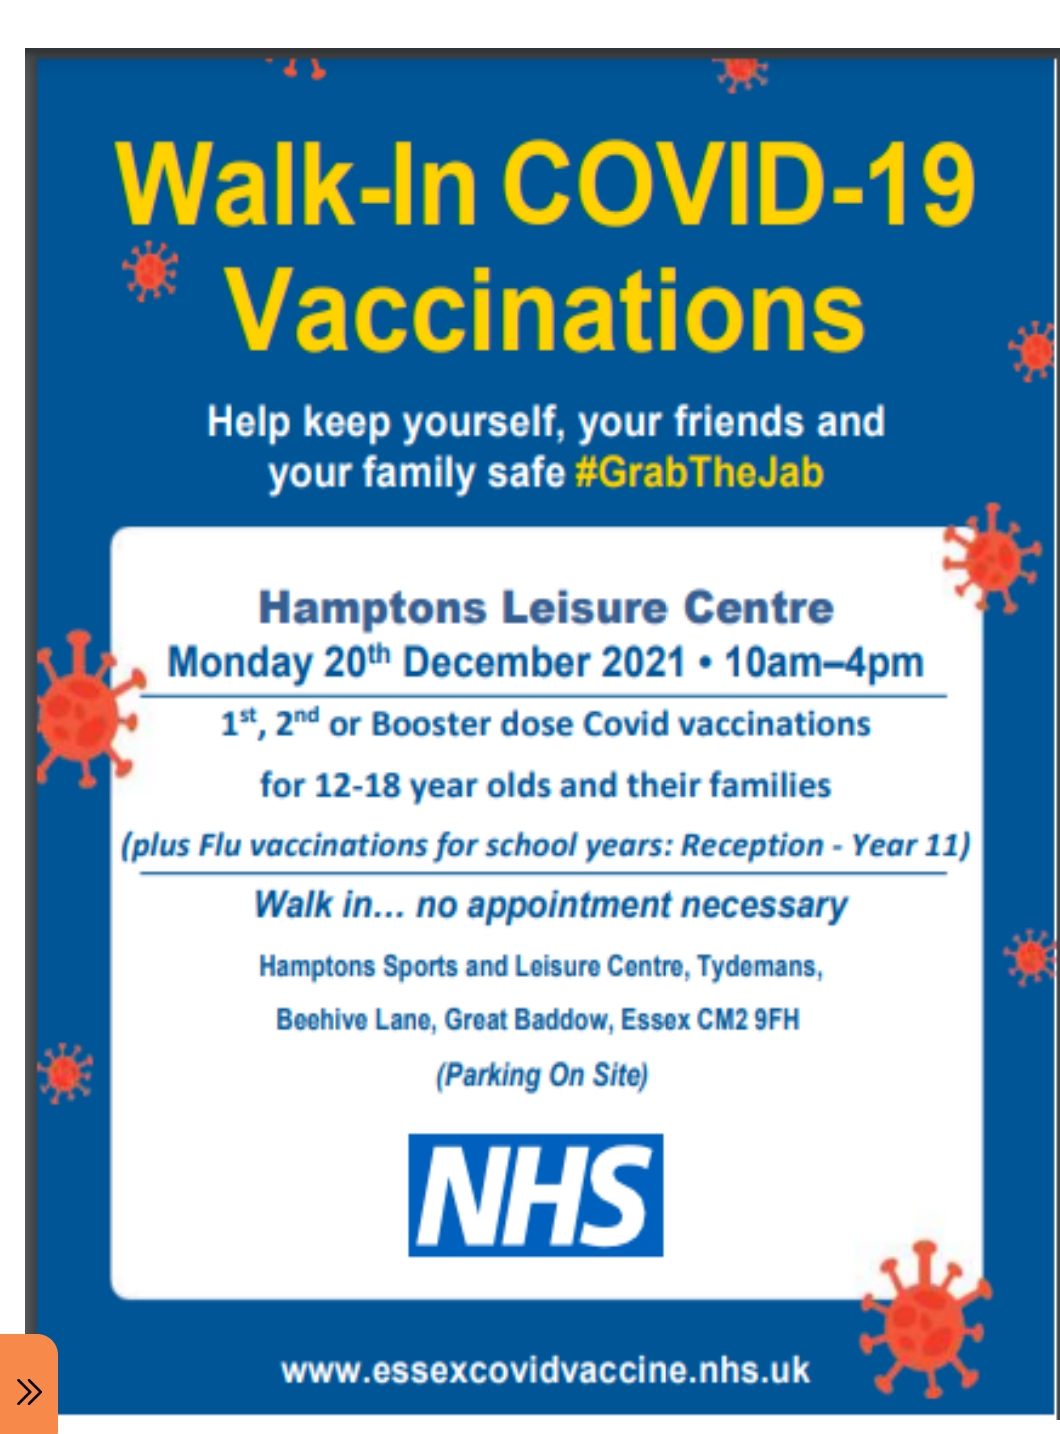 walk in covid-19 vaccination clinic at hamptons leisure centre poster